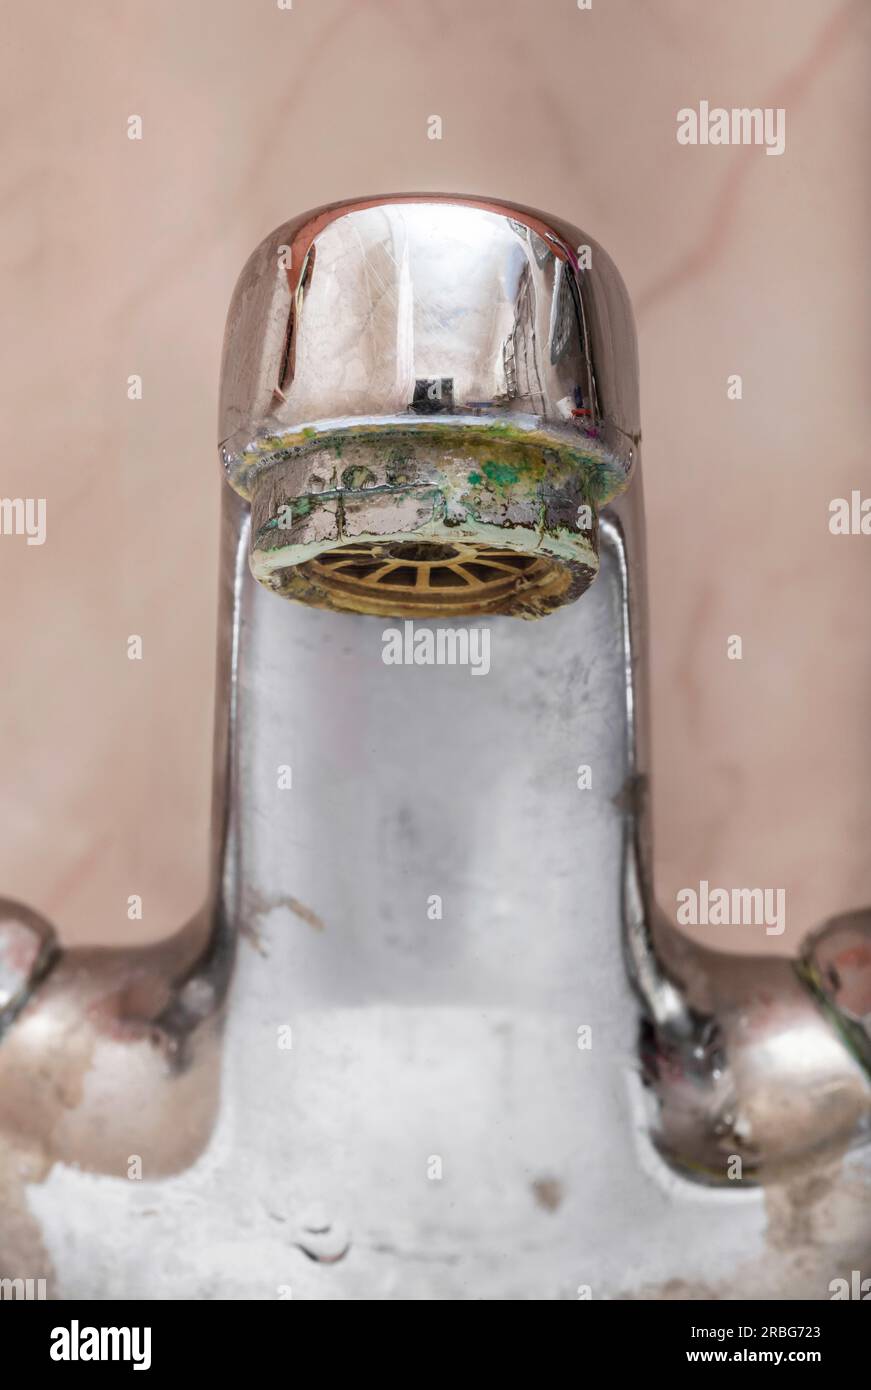 Vertical macro image of closed tap over a white bathroom sink Stock Photo